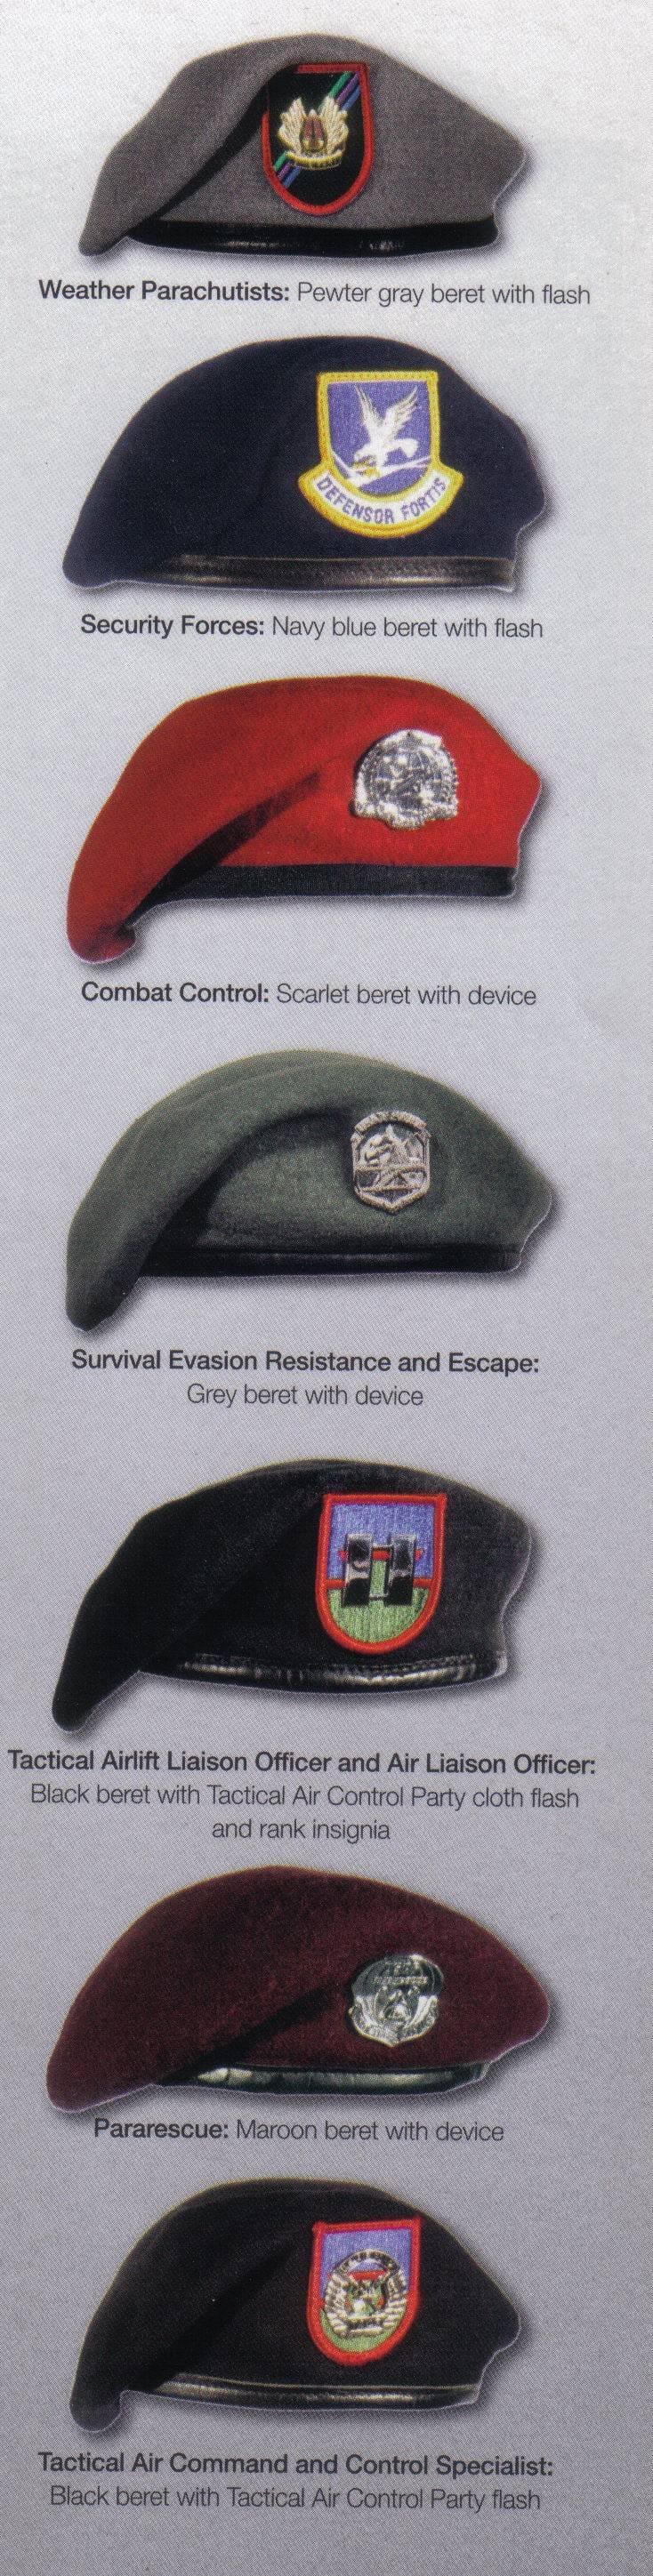 Decoding Those Air Force Berets Soldier Systems Daily, 44% OFF